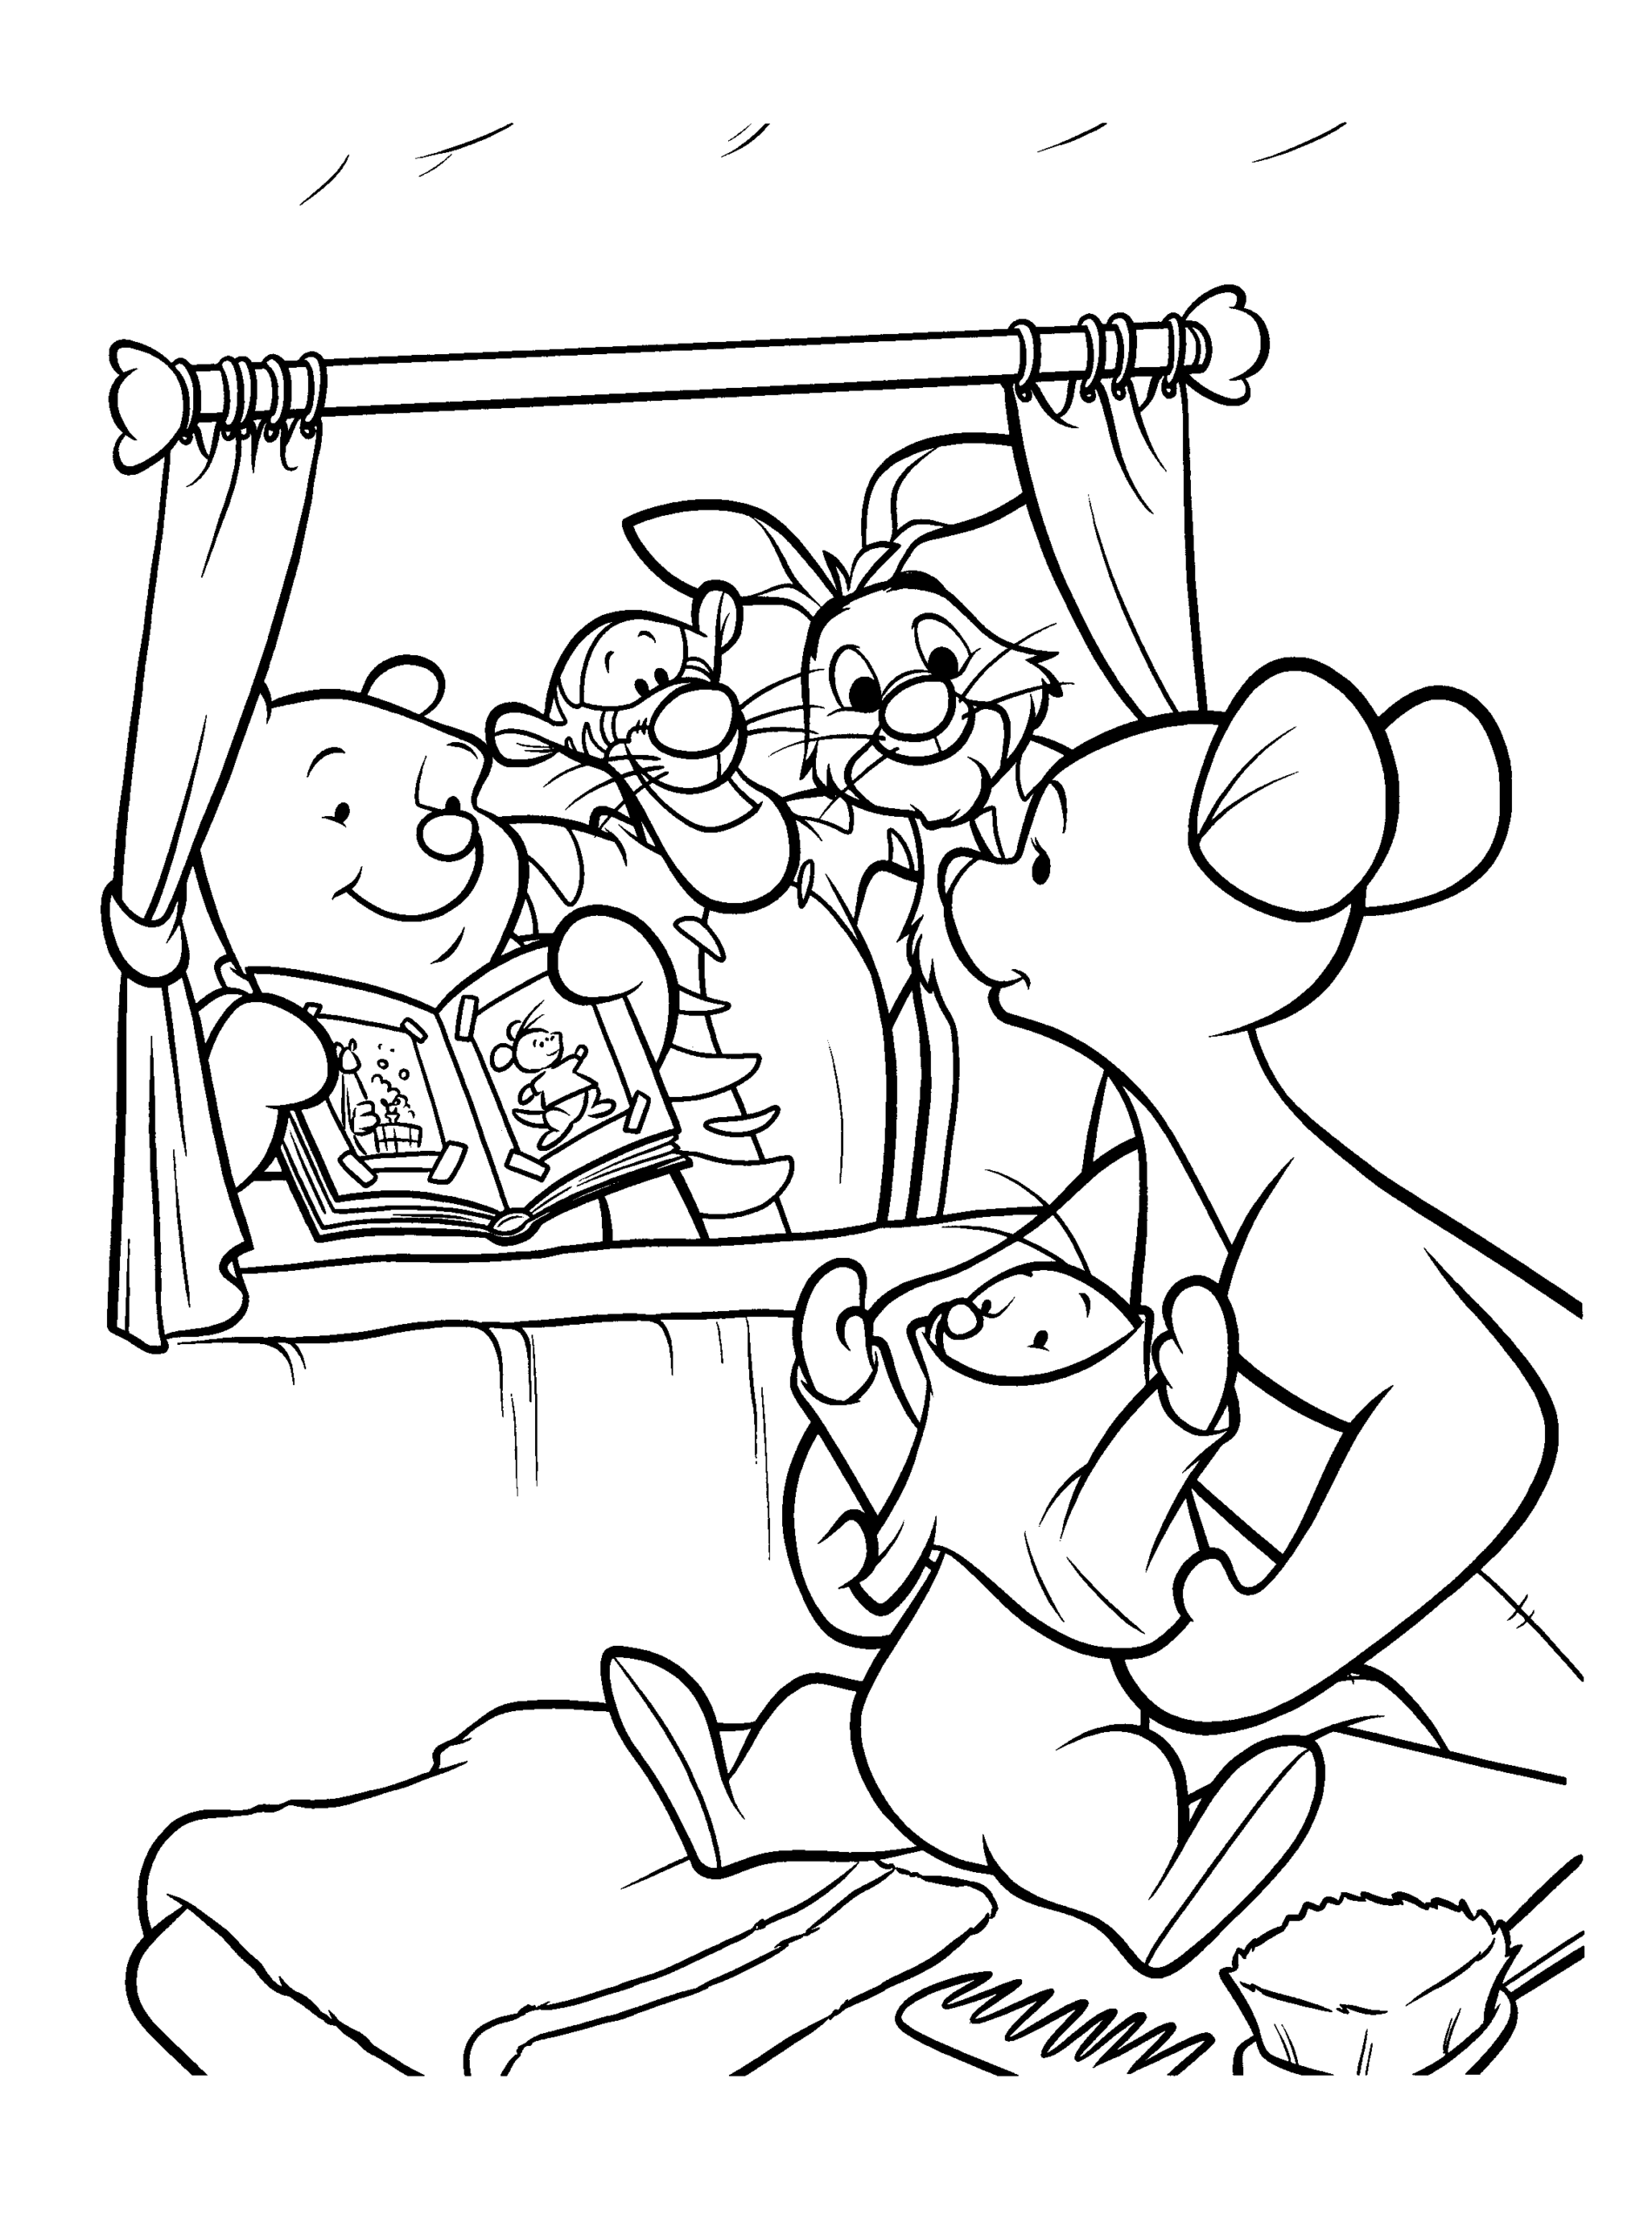 Winnie the Pooh Coloring Pages Cartoons winnie the pooh 21 Printable 2020 7119 Coloring4free